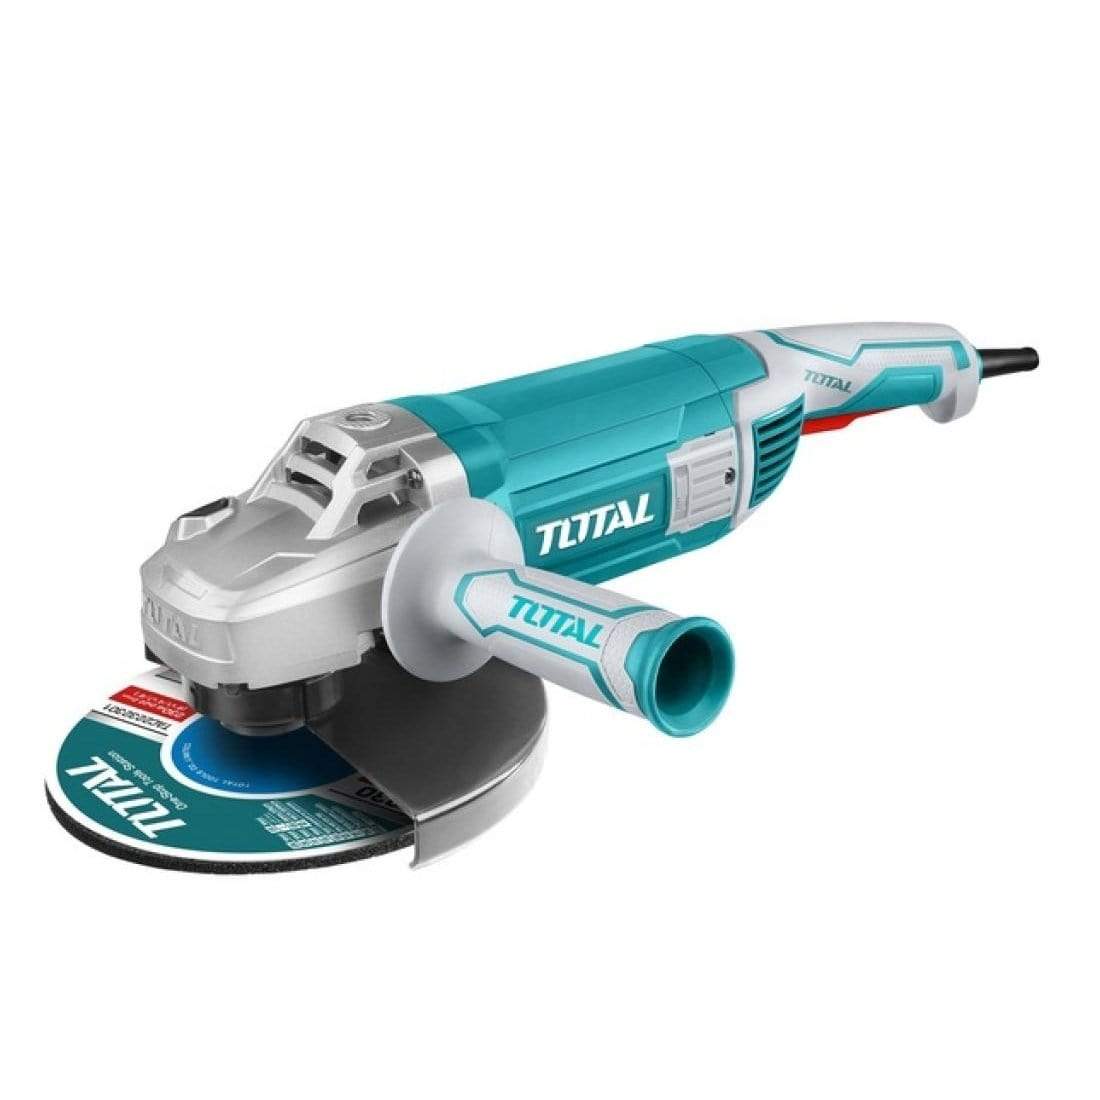 Total angle grinder 9" 3000w